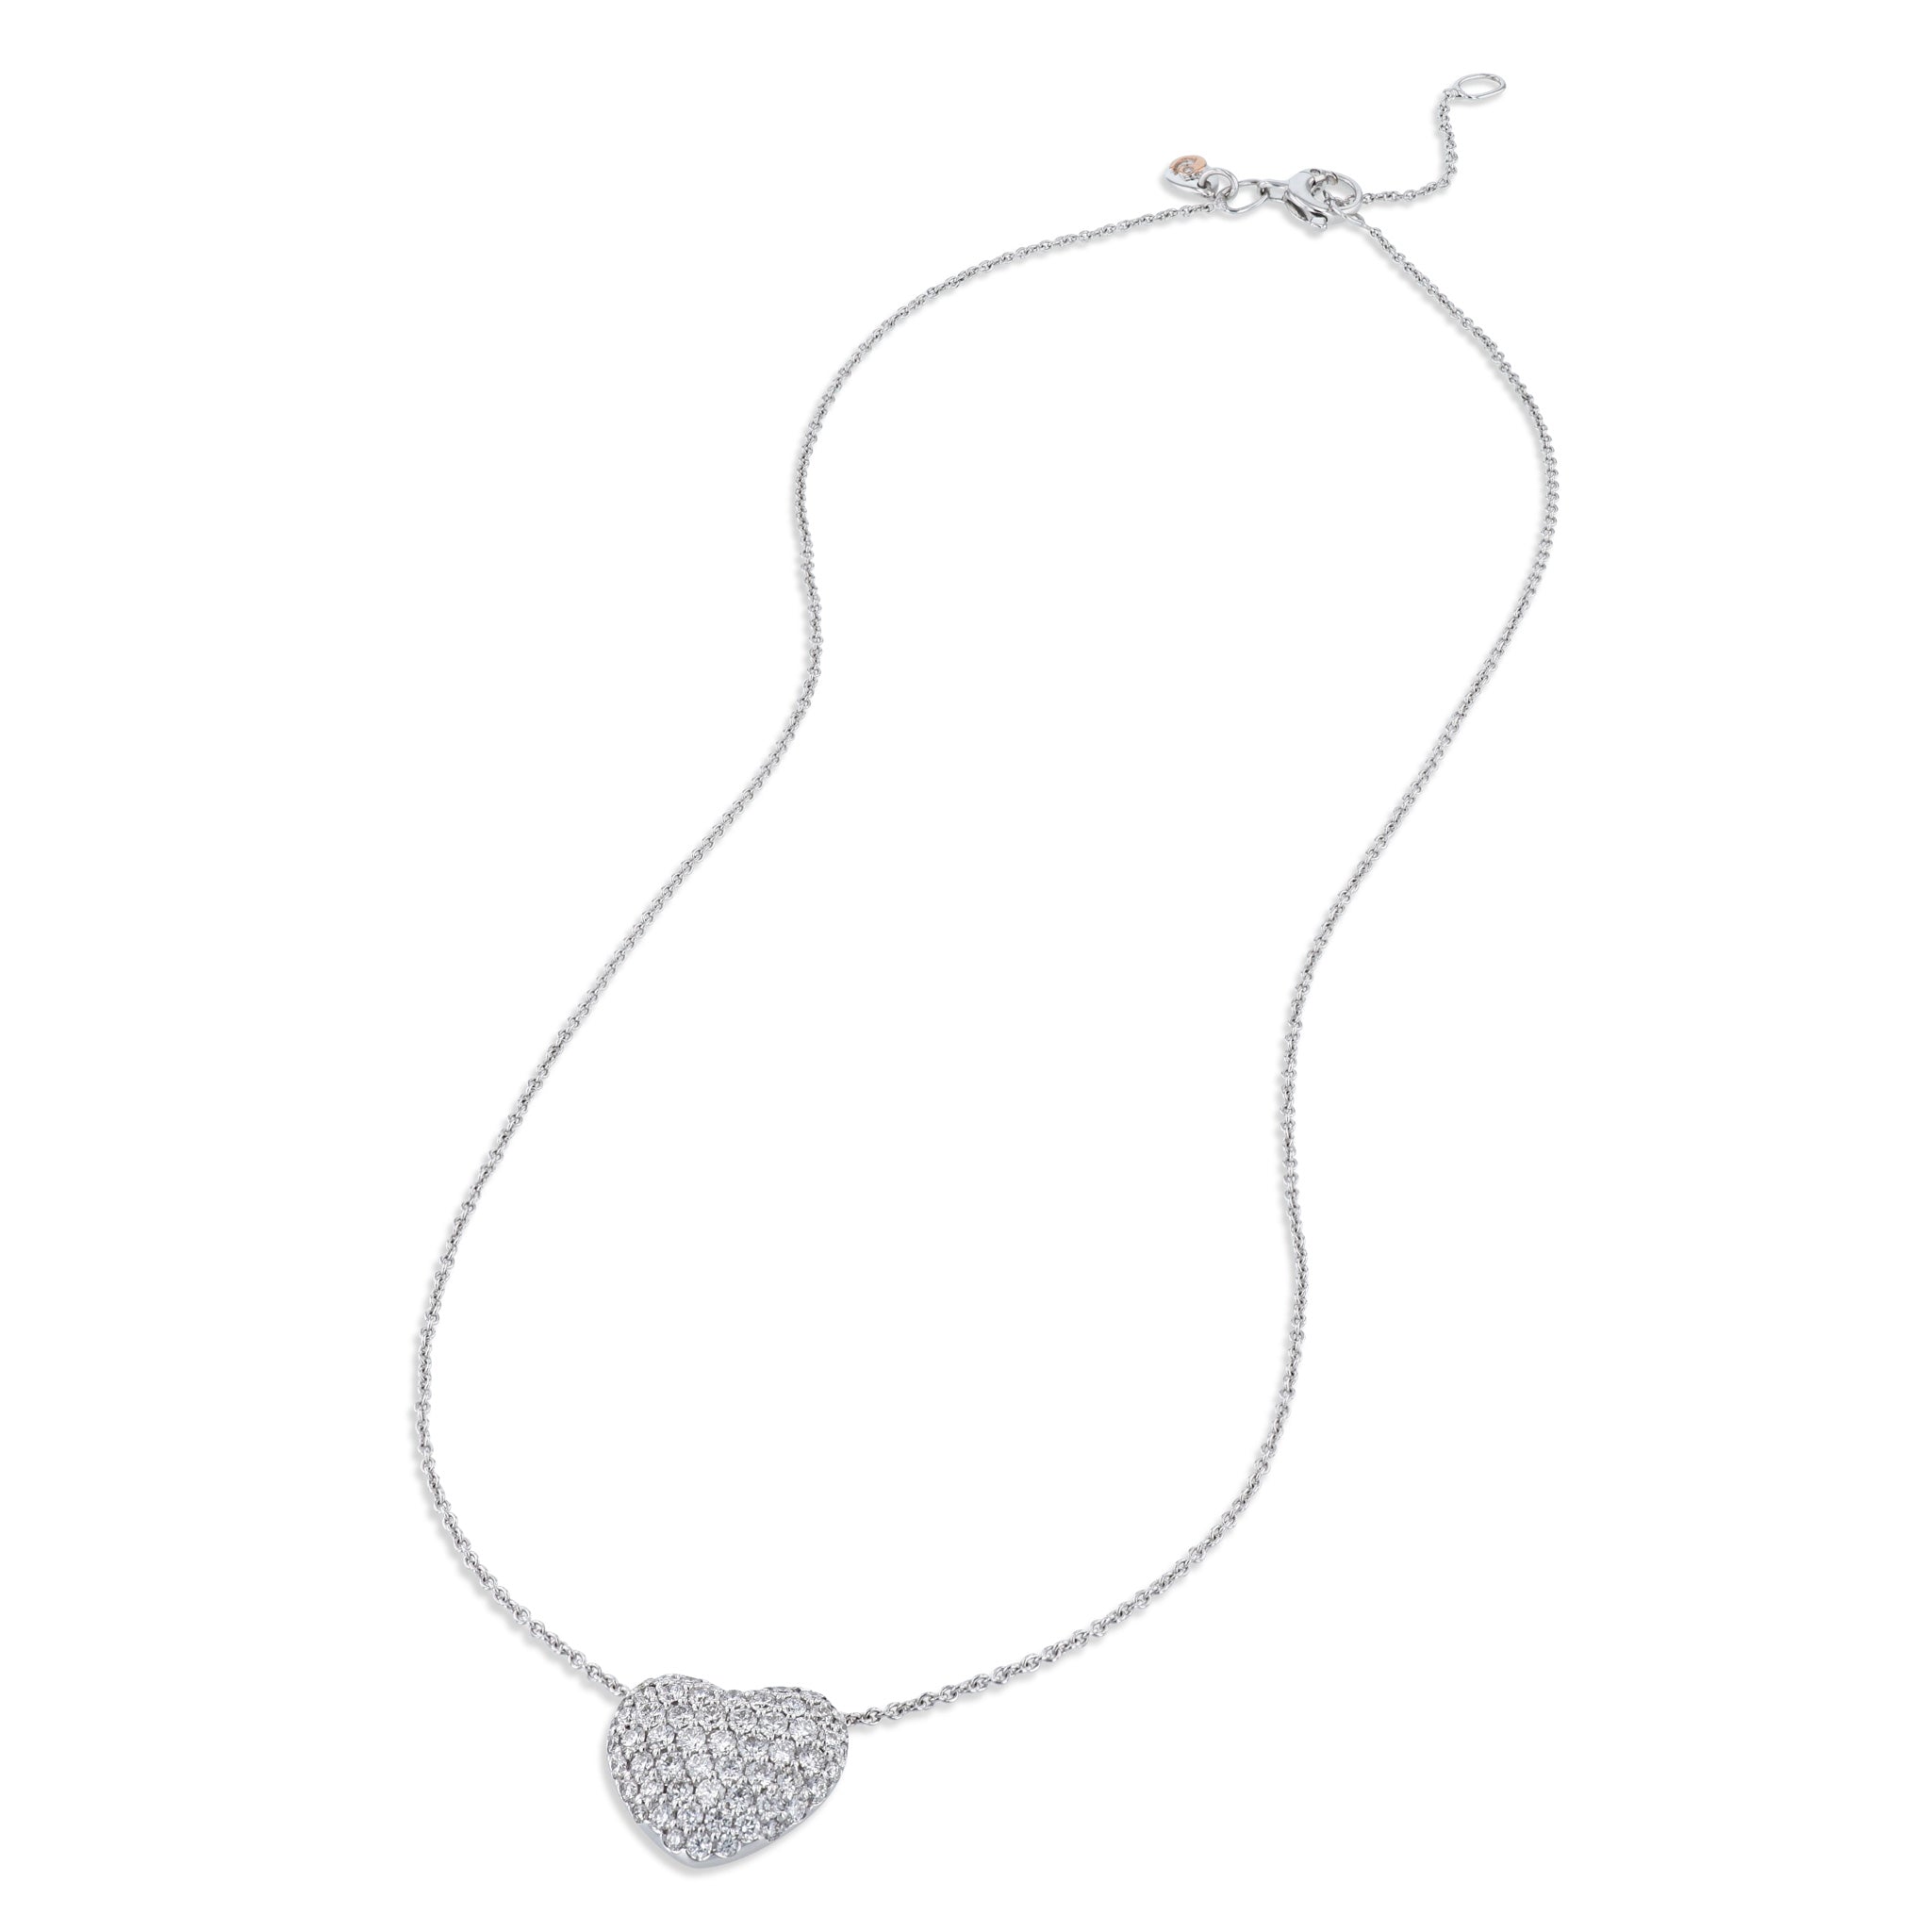 Pave Diamond White Gold Heart Necklace Necklaces Curated by H